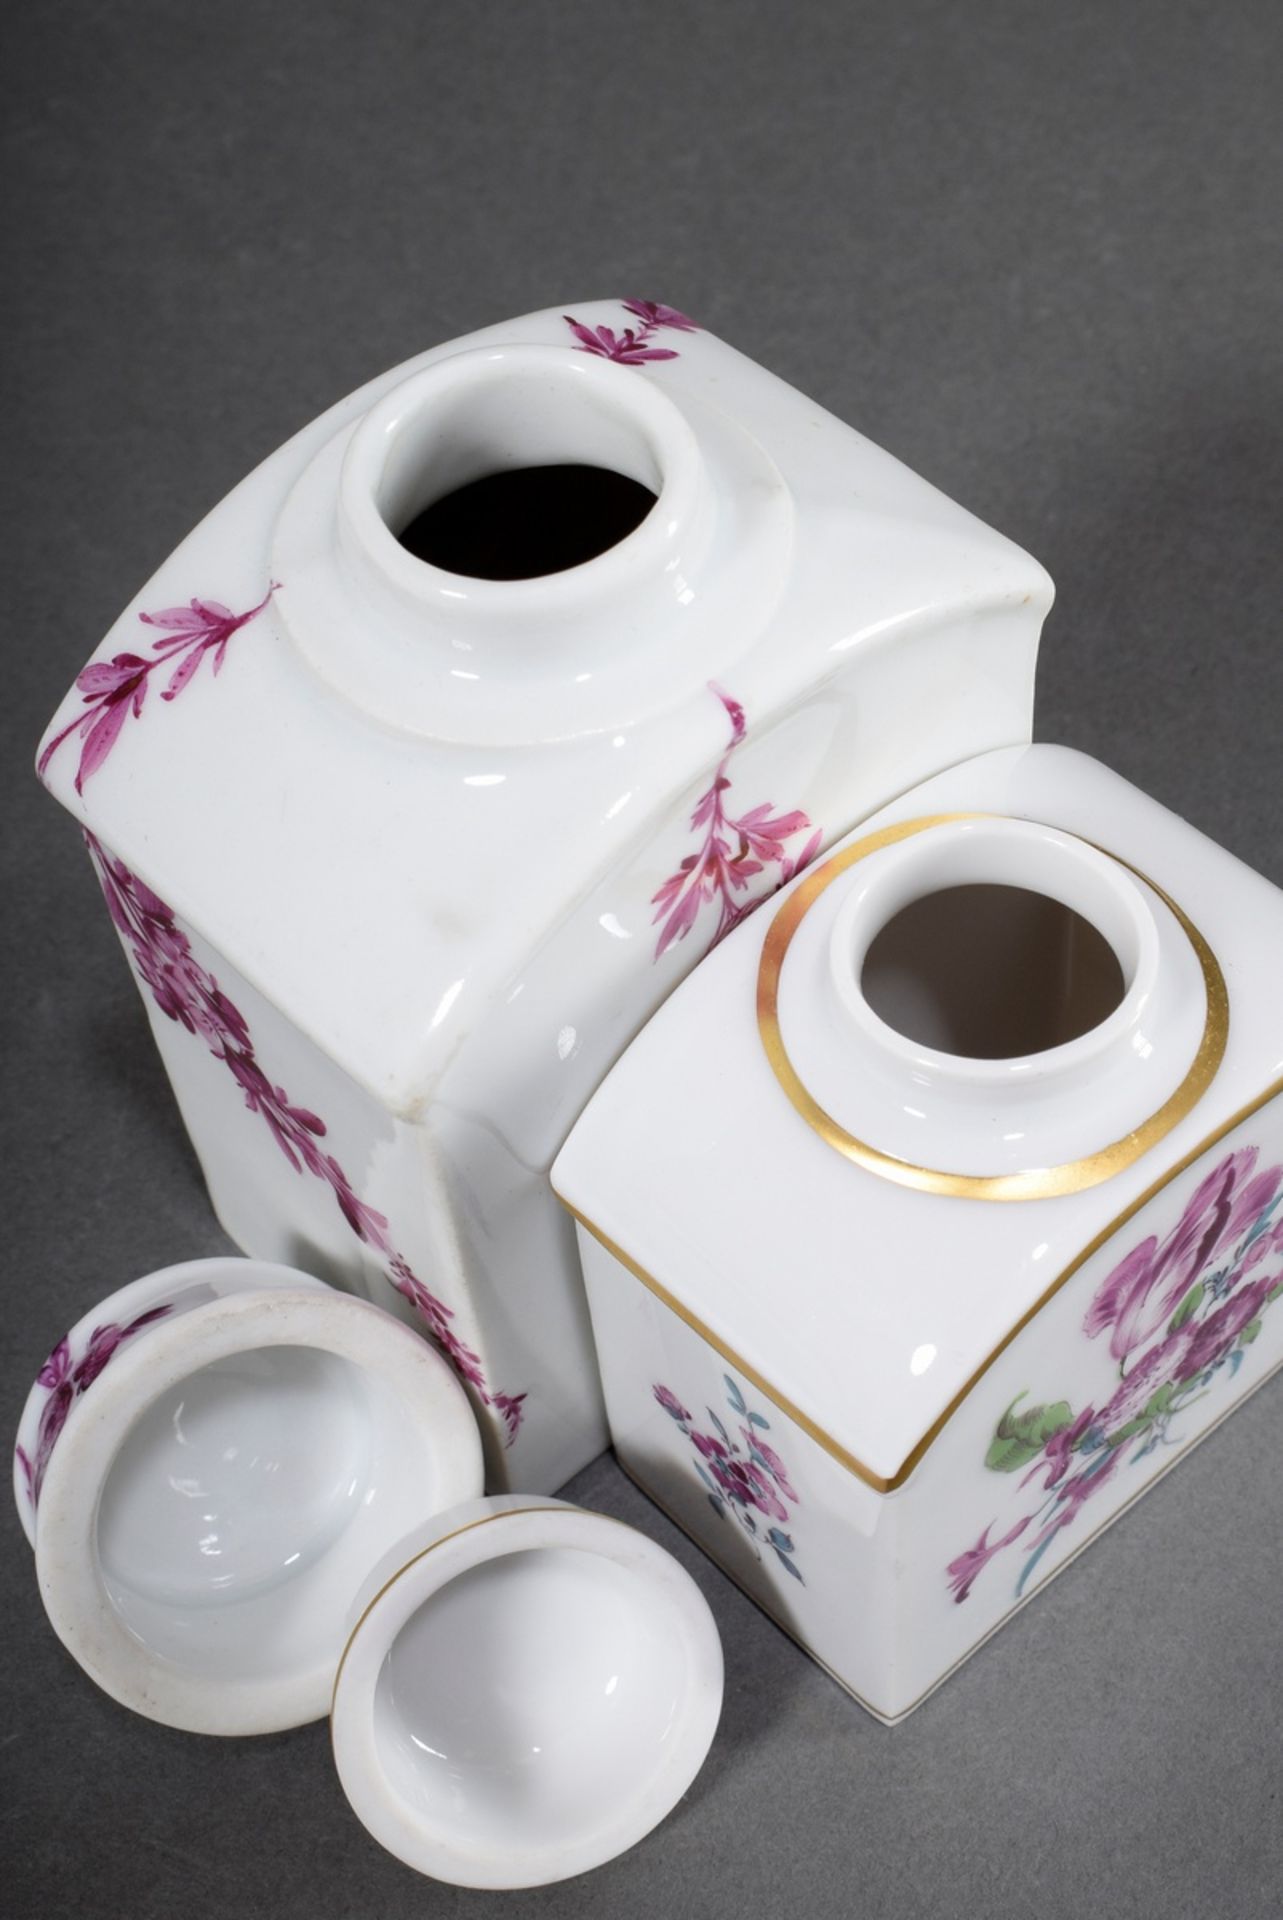 2 Various Meissen tea caddies with purple camaieu painting "Flowers", 1x with green accentuation an - Image 3 of 3